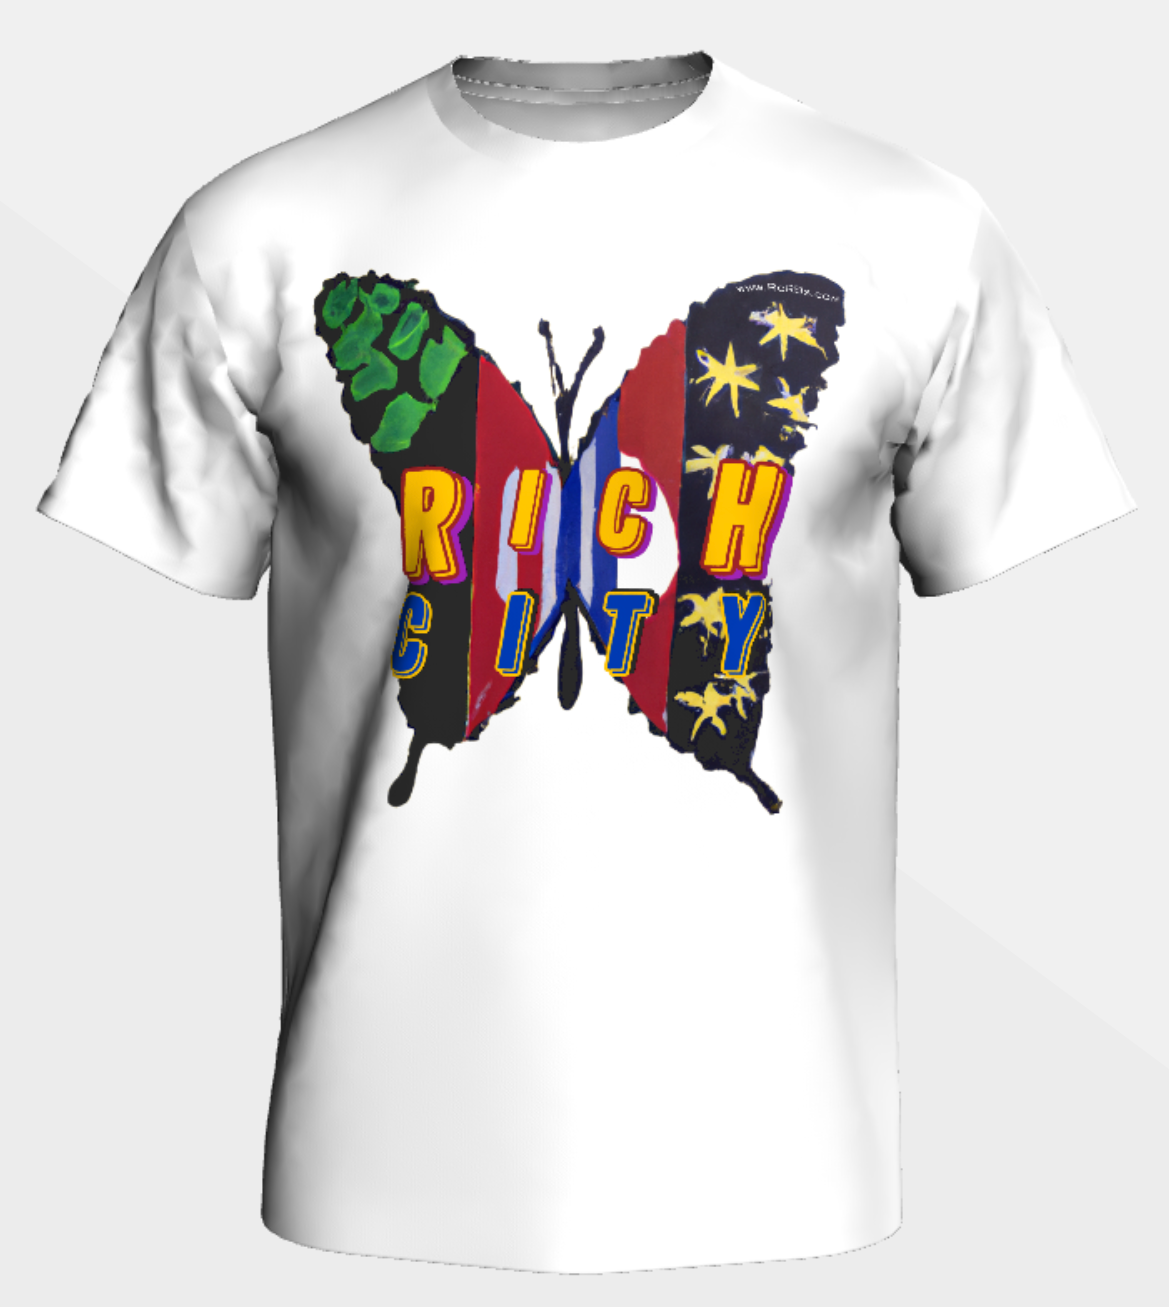 "Evry1's Brand" RichCity -"The Butterfly Effect"- #6 Sustainable Clothing Collection